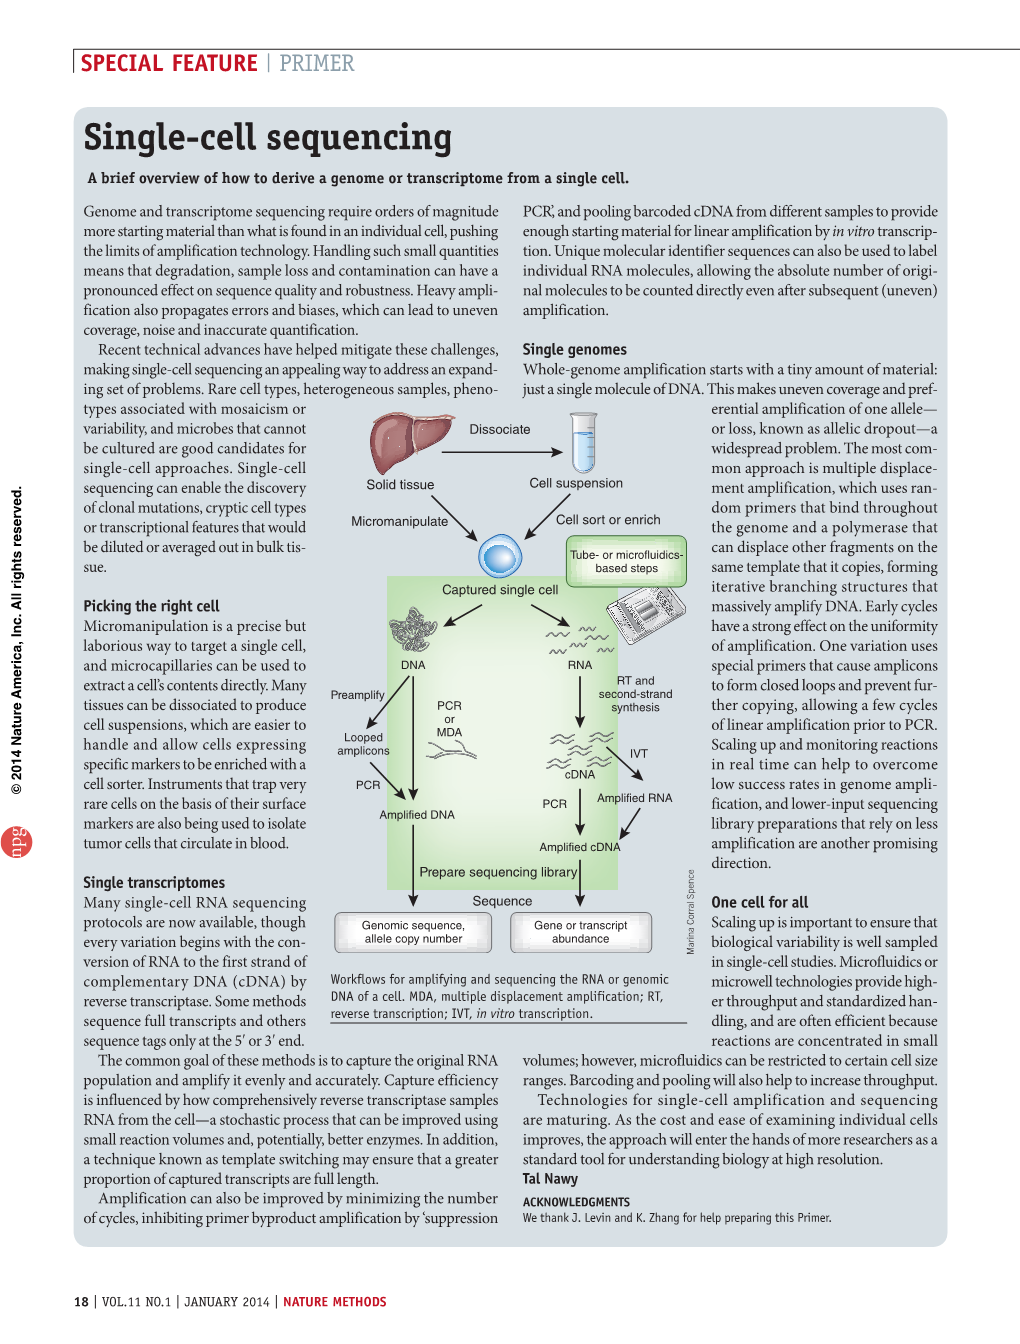 Single-Cell Sequencing a Brief Overview of How to Derive a Genome Or Transcriptome from a Single Cell